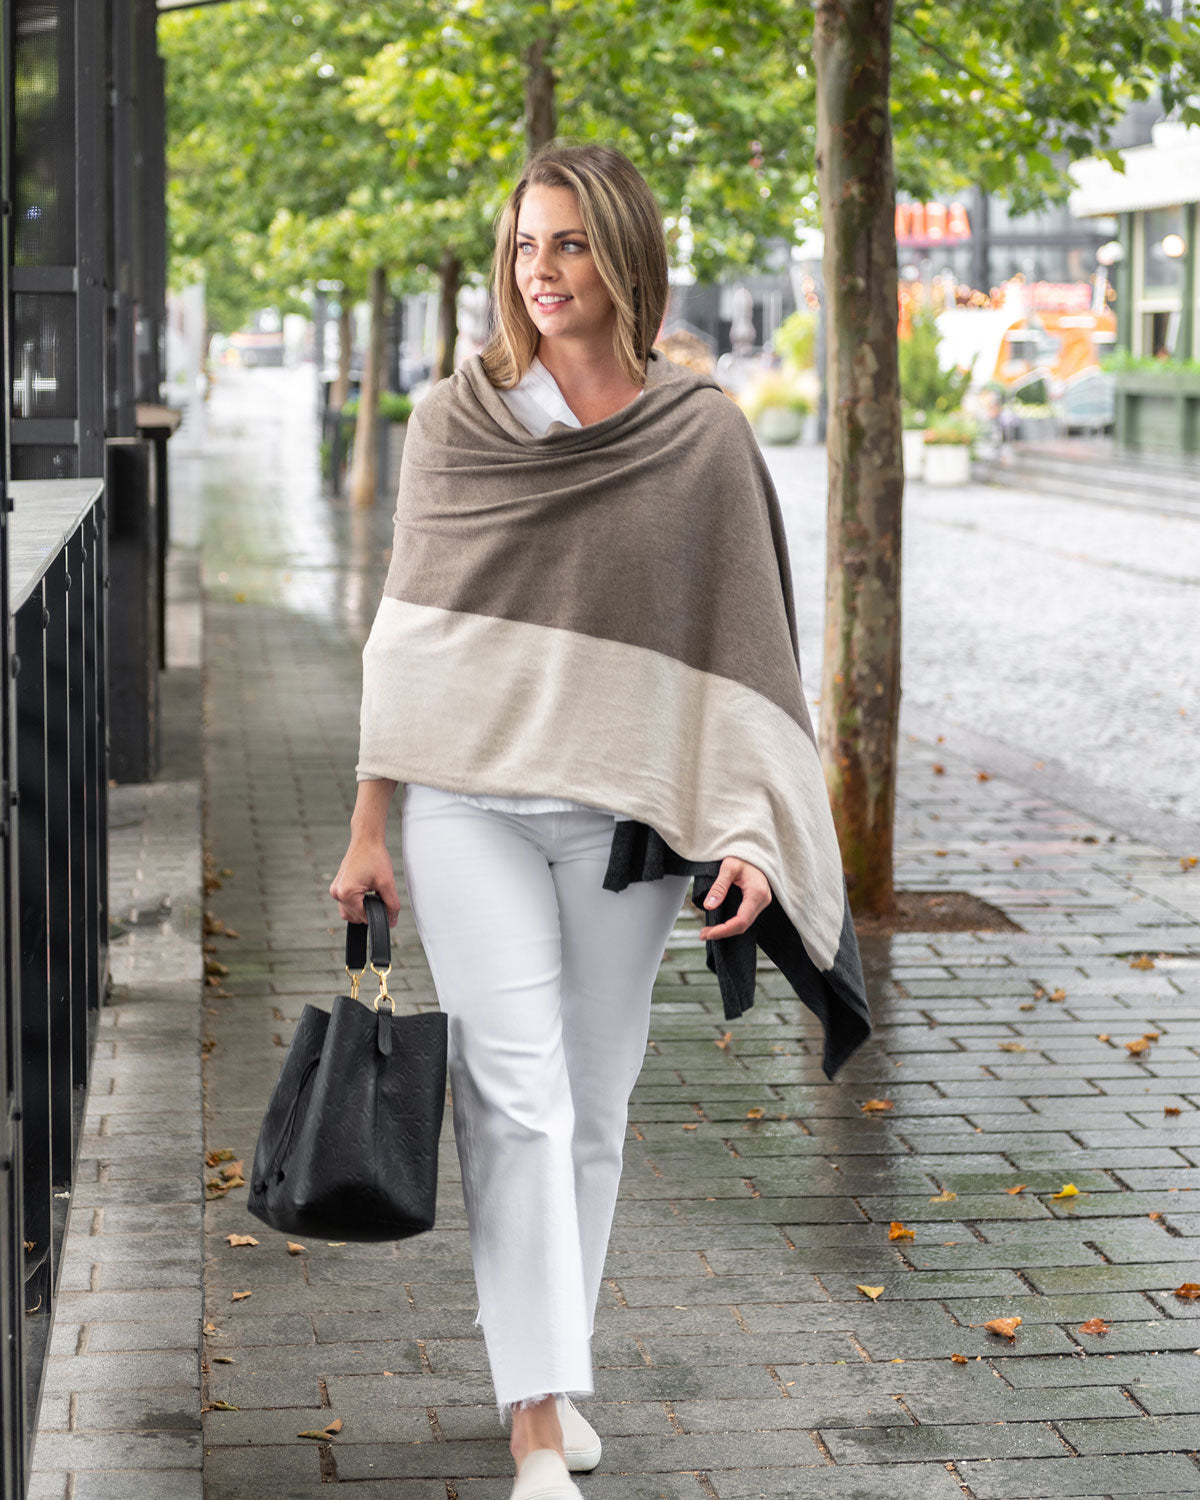 Woman wearing the Dreamsoft Travel Scarf in Brownstone Colorblock which is a brown, tan and gray scarf, walking down the street while carrying her purse